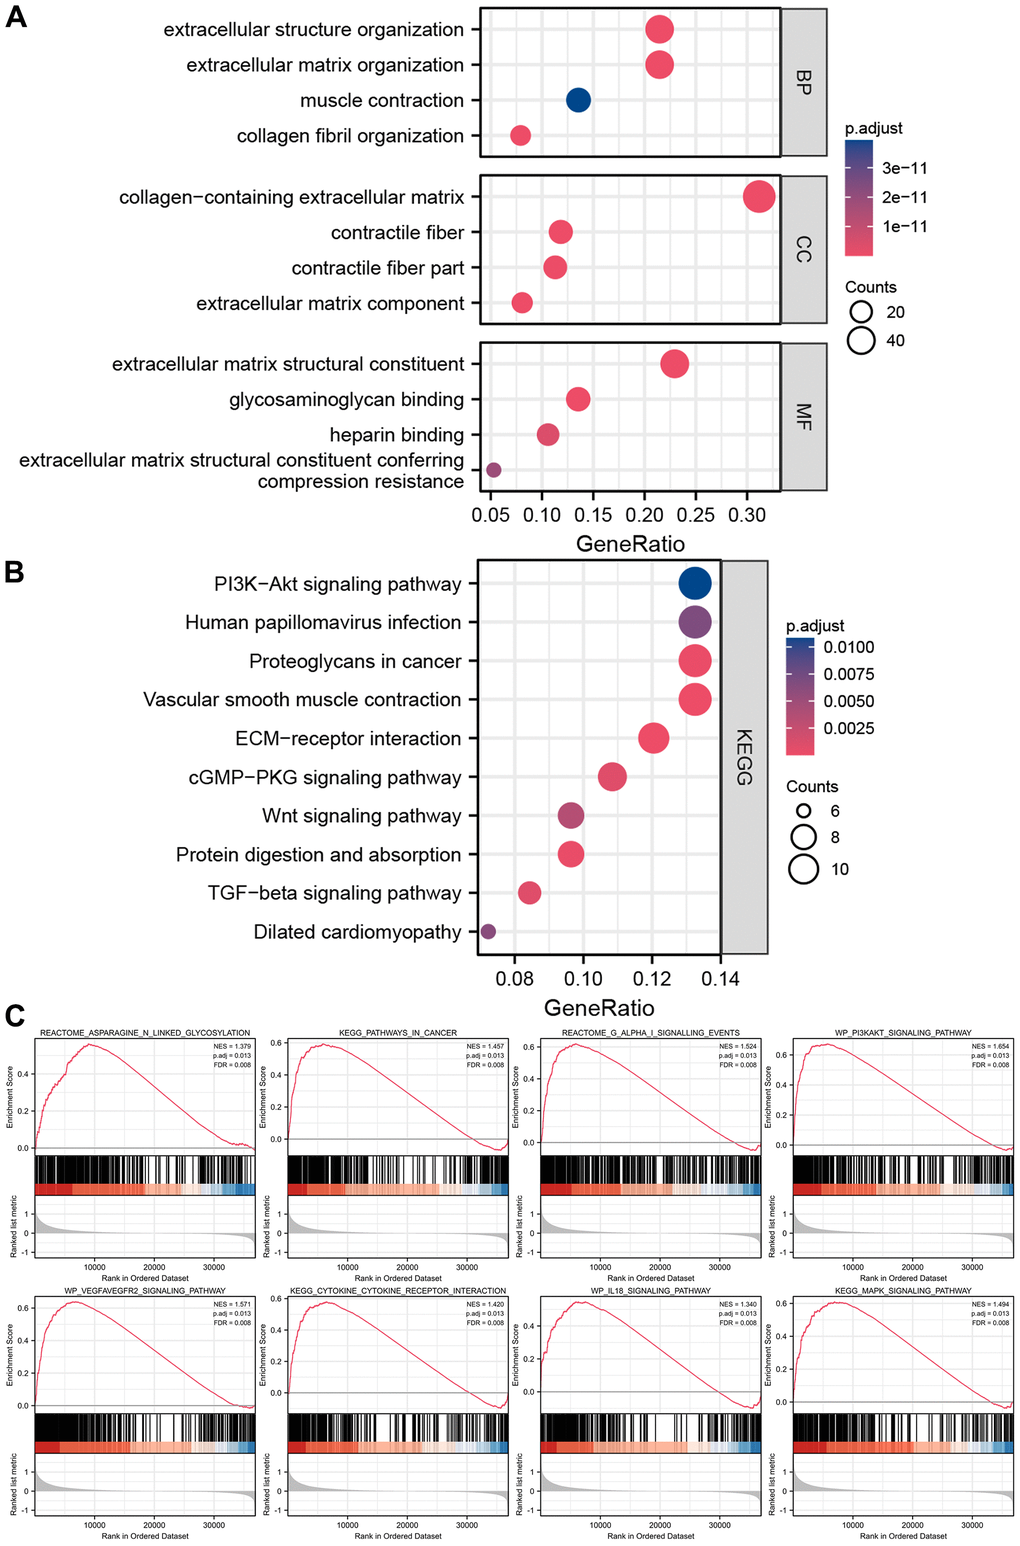 Enrichment analyses and GSEA analysis of differentially expressed genes between high-risk groups and low-risk groups. (A) The results of GO analysis. (B) The results of KEGG analysis. (C) The results of GSEA analysis between high-risk groups and low-risk groups.